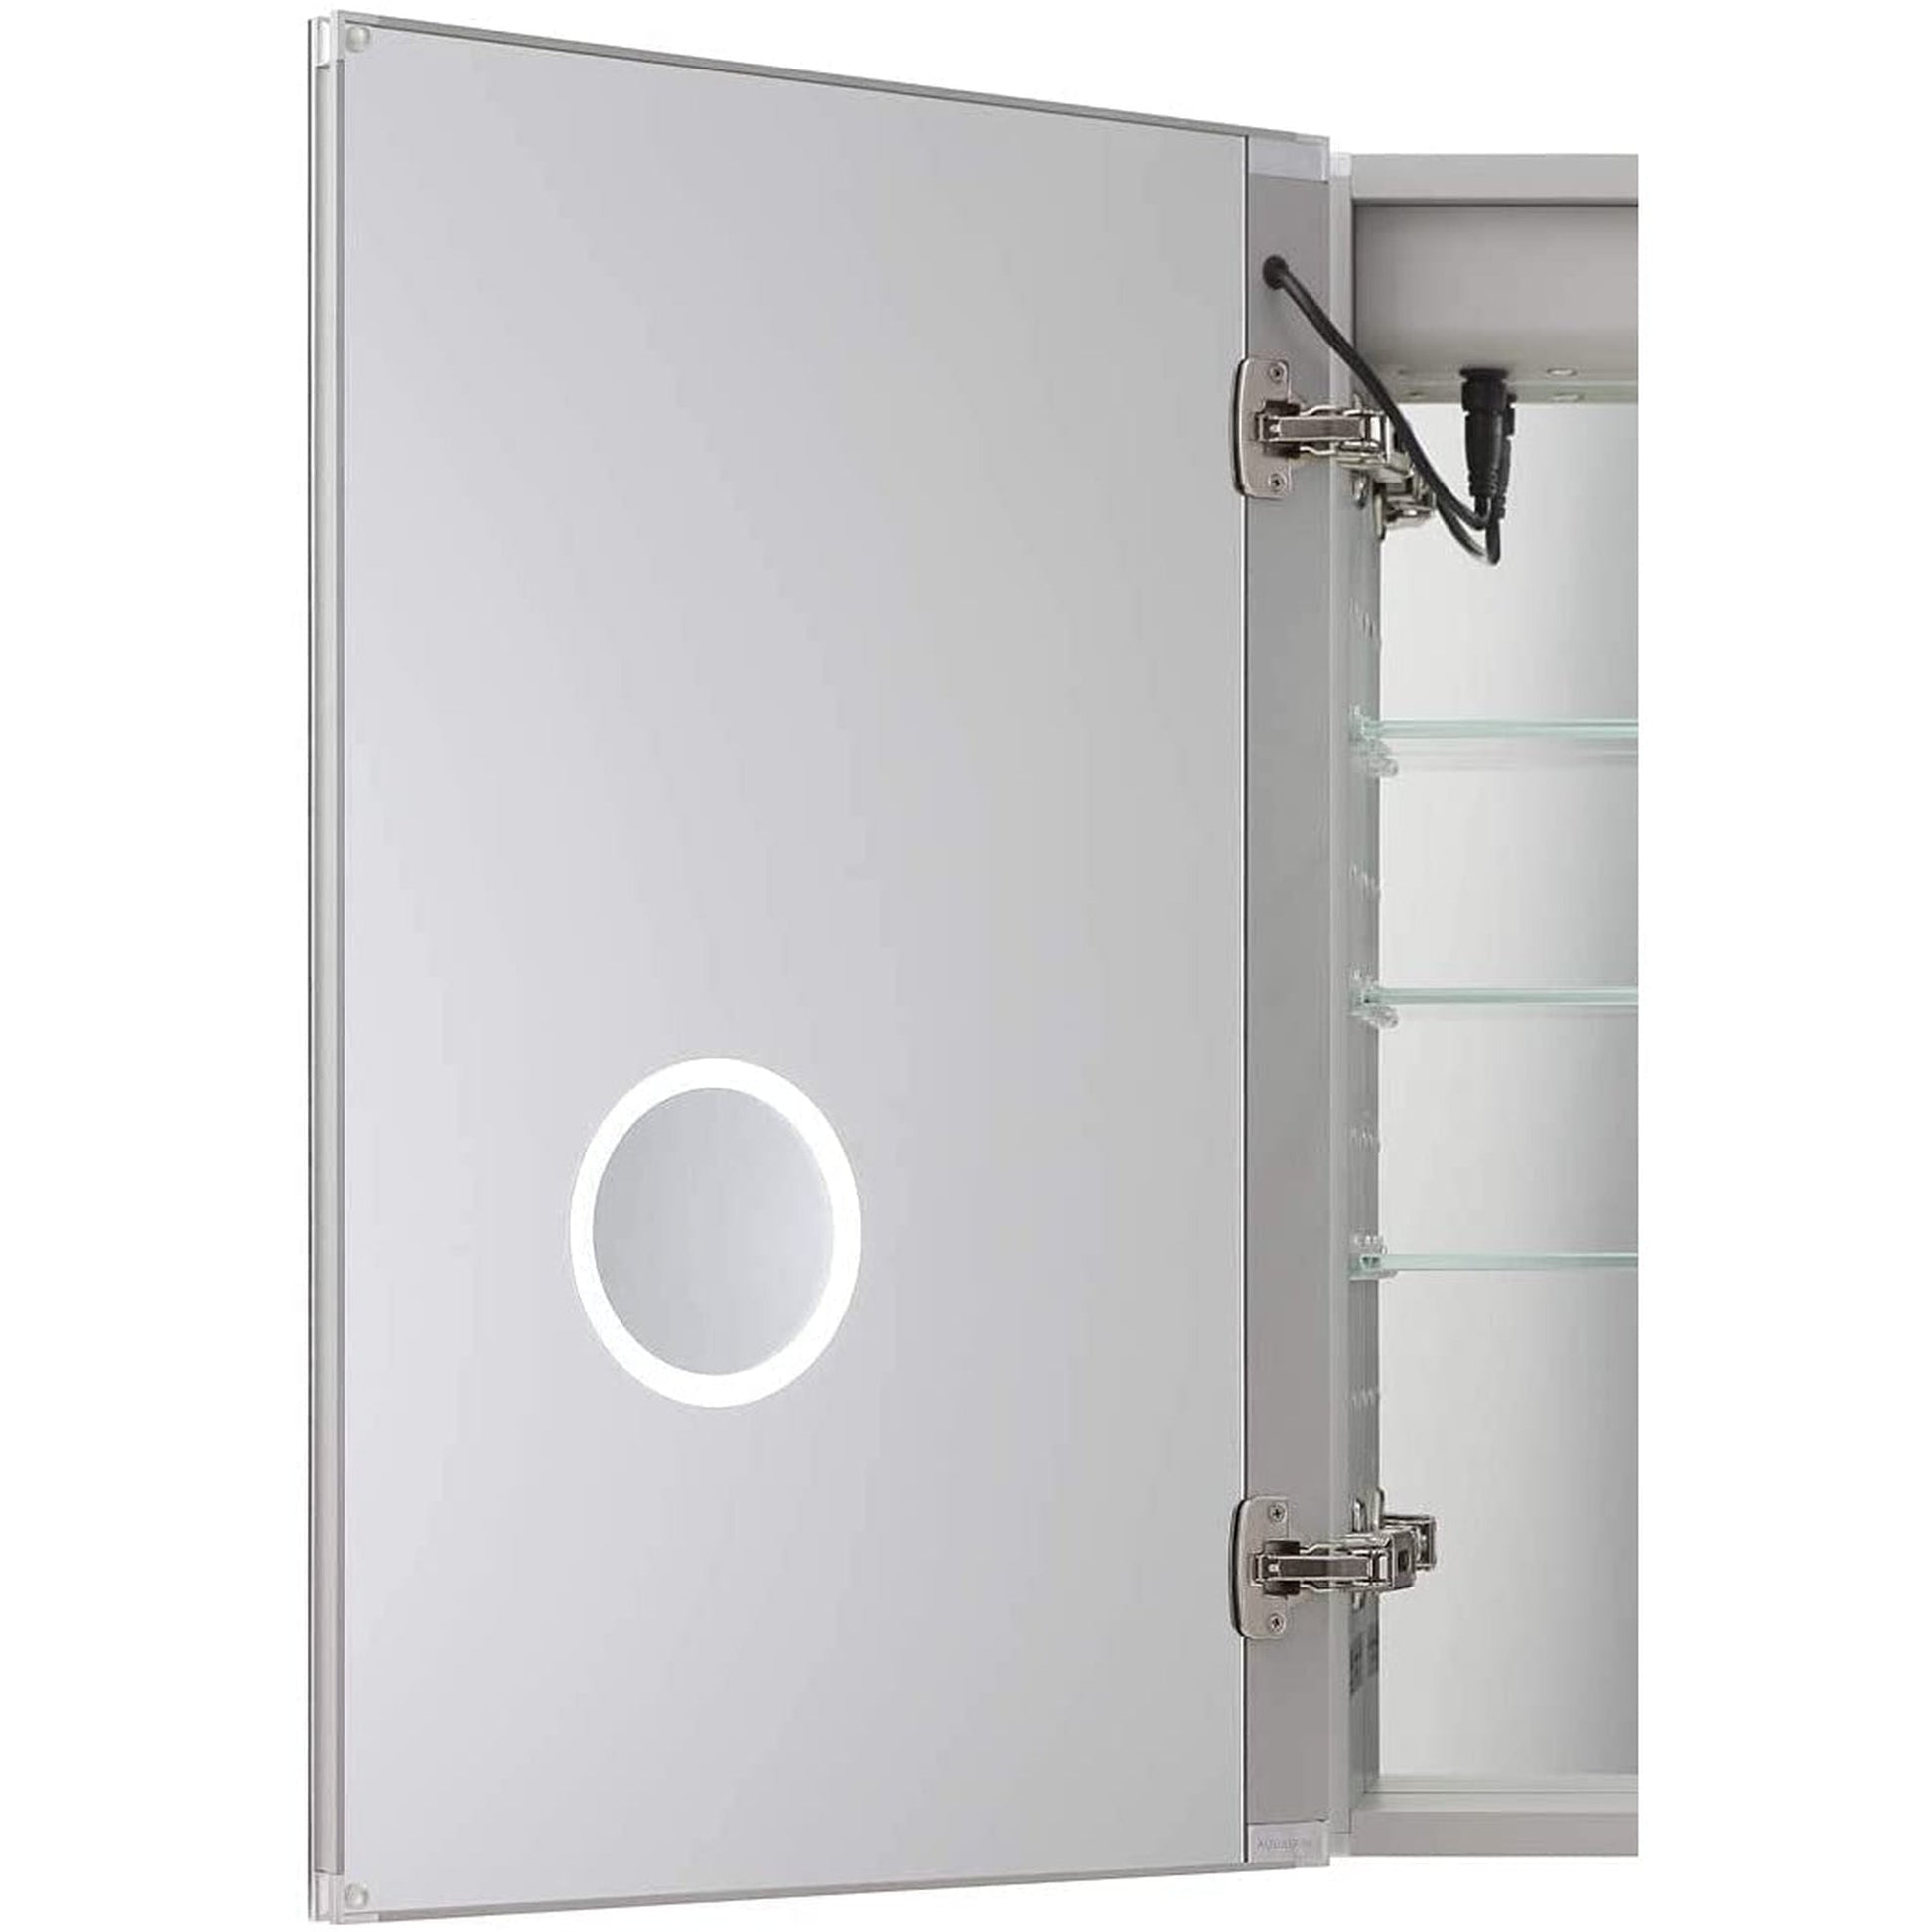 Aquadom Royale Plus 40" x 30" Rectangle Recessed or Surface Mount Bi-View LED Lighted Bathroom Medicine Cabinet With Defogger, Electrical Outlet, Magnifying Mirror